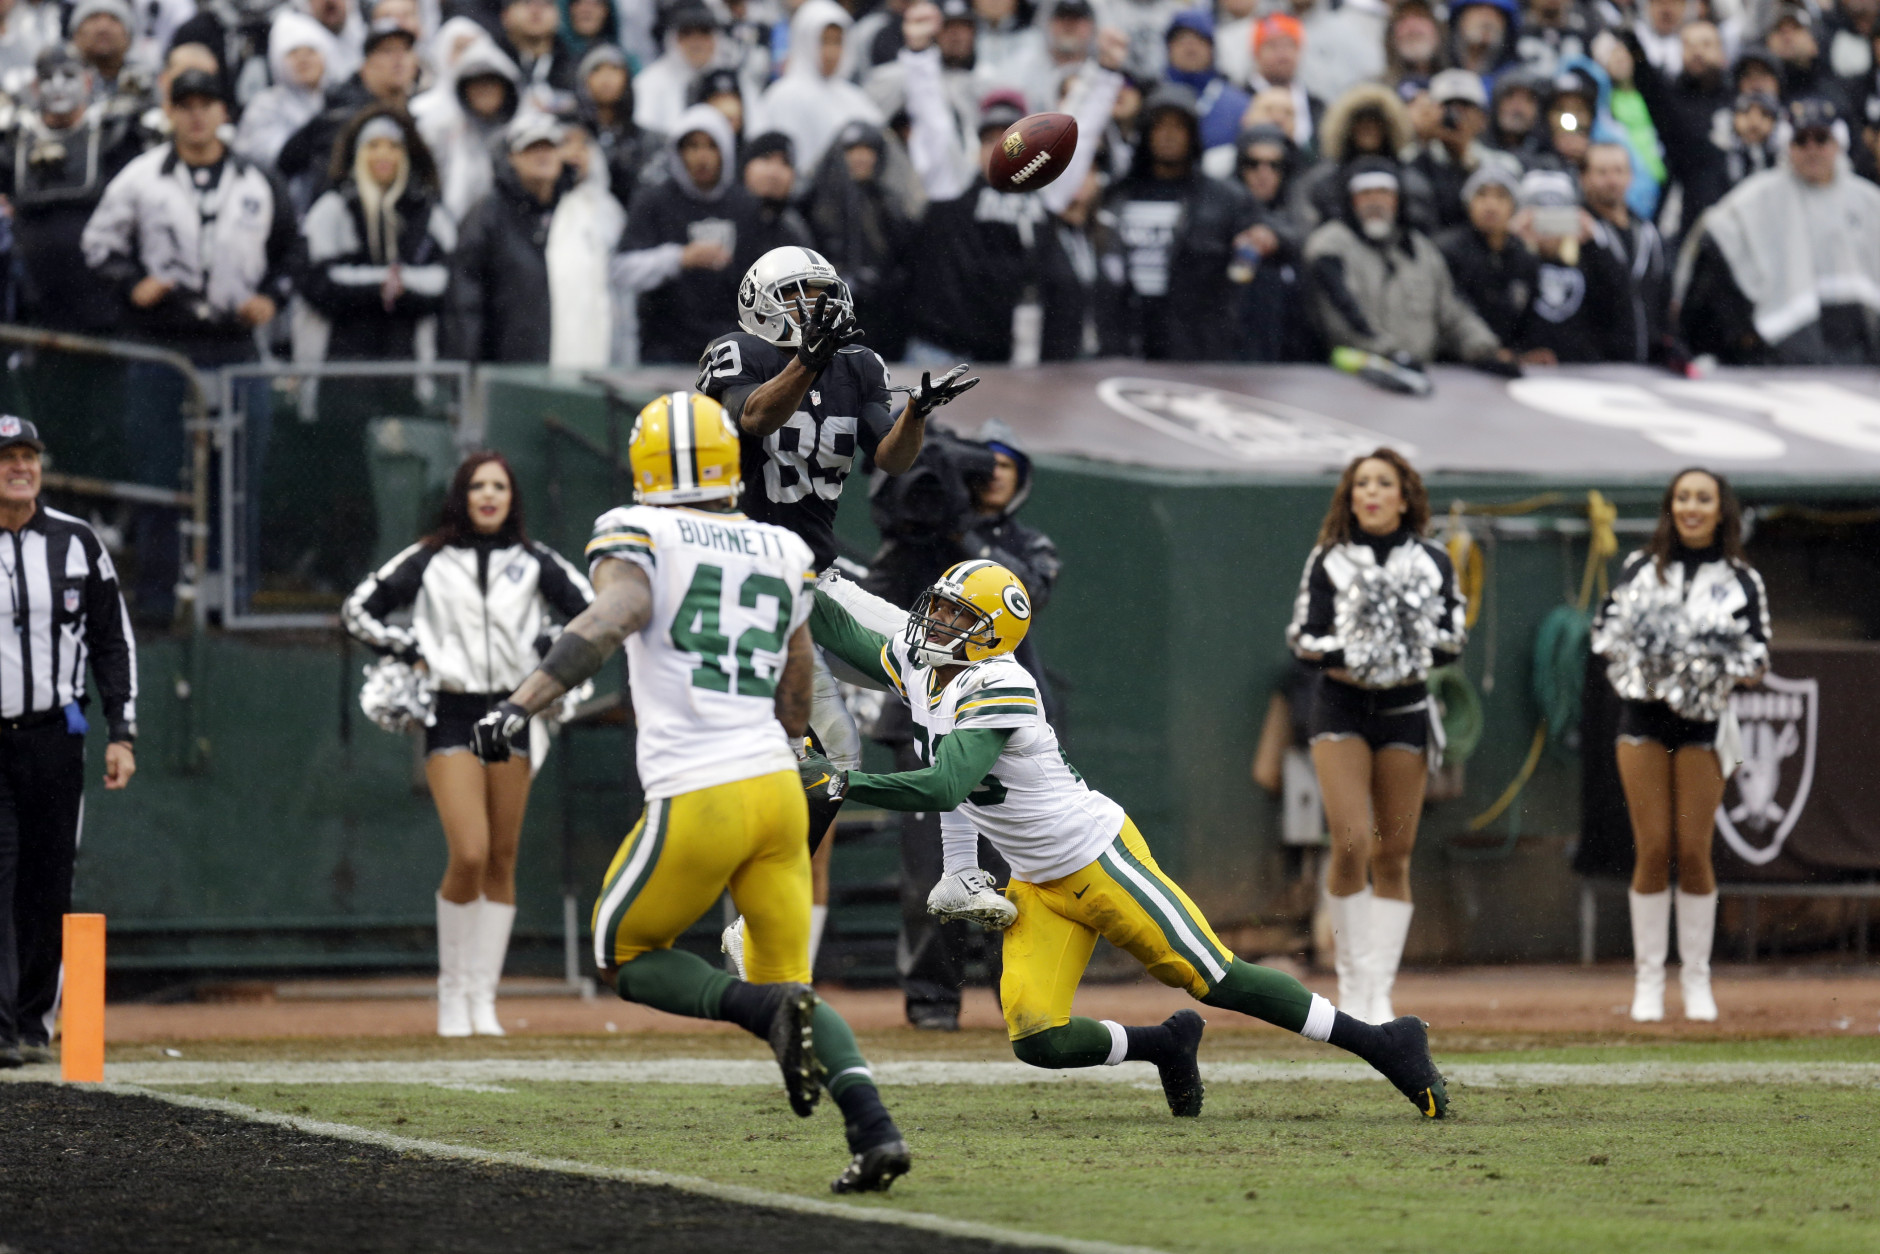 Oakland Raiders wide receiver Amari Cooper (89) catches a 26-yard touchdown pass against the Green Bay Packers during the second half of an NFL football game Sunday, Dec. 20, 2015, in Oakland, Calif. (AP Photo/Ben Margot)